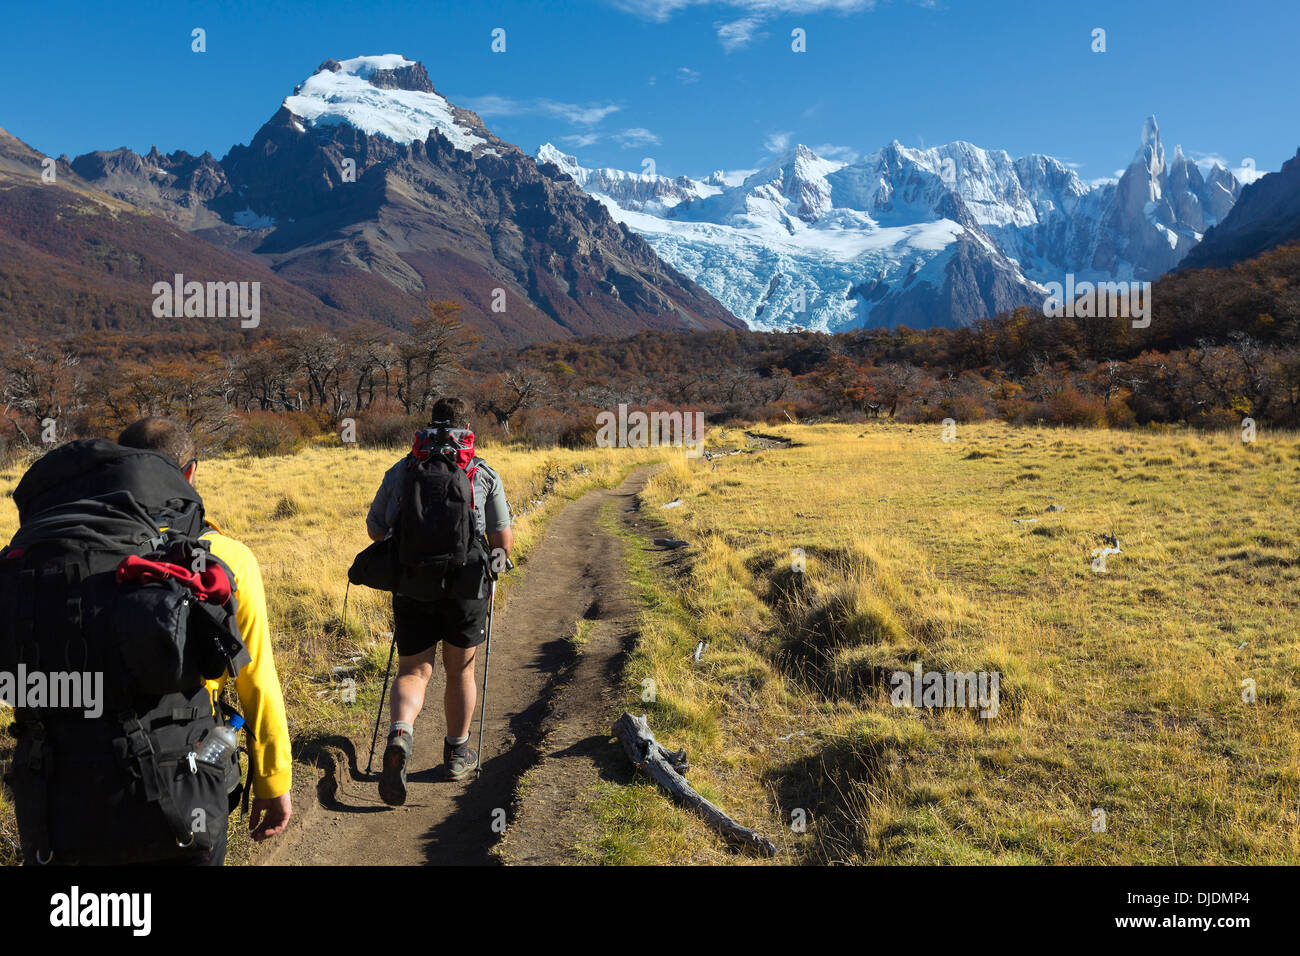 Tourists hiking on a path towards Los Cuernos 'the Horns' at Torres del Paine National Park, Chile Stock Photo